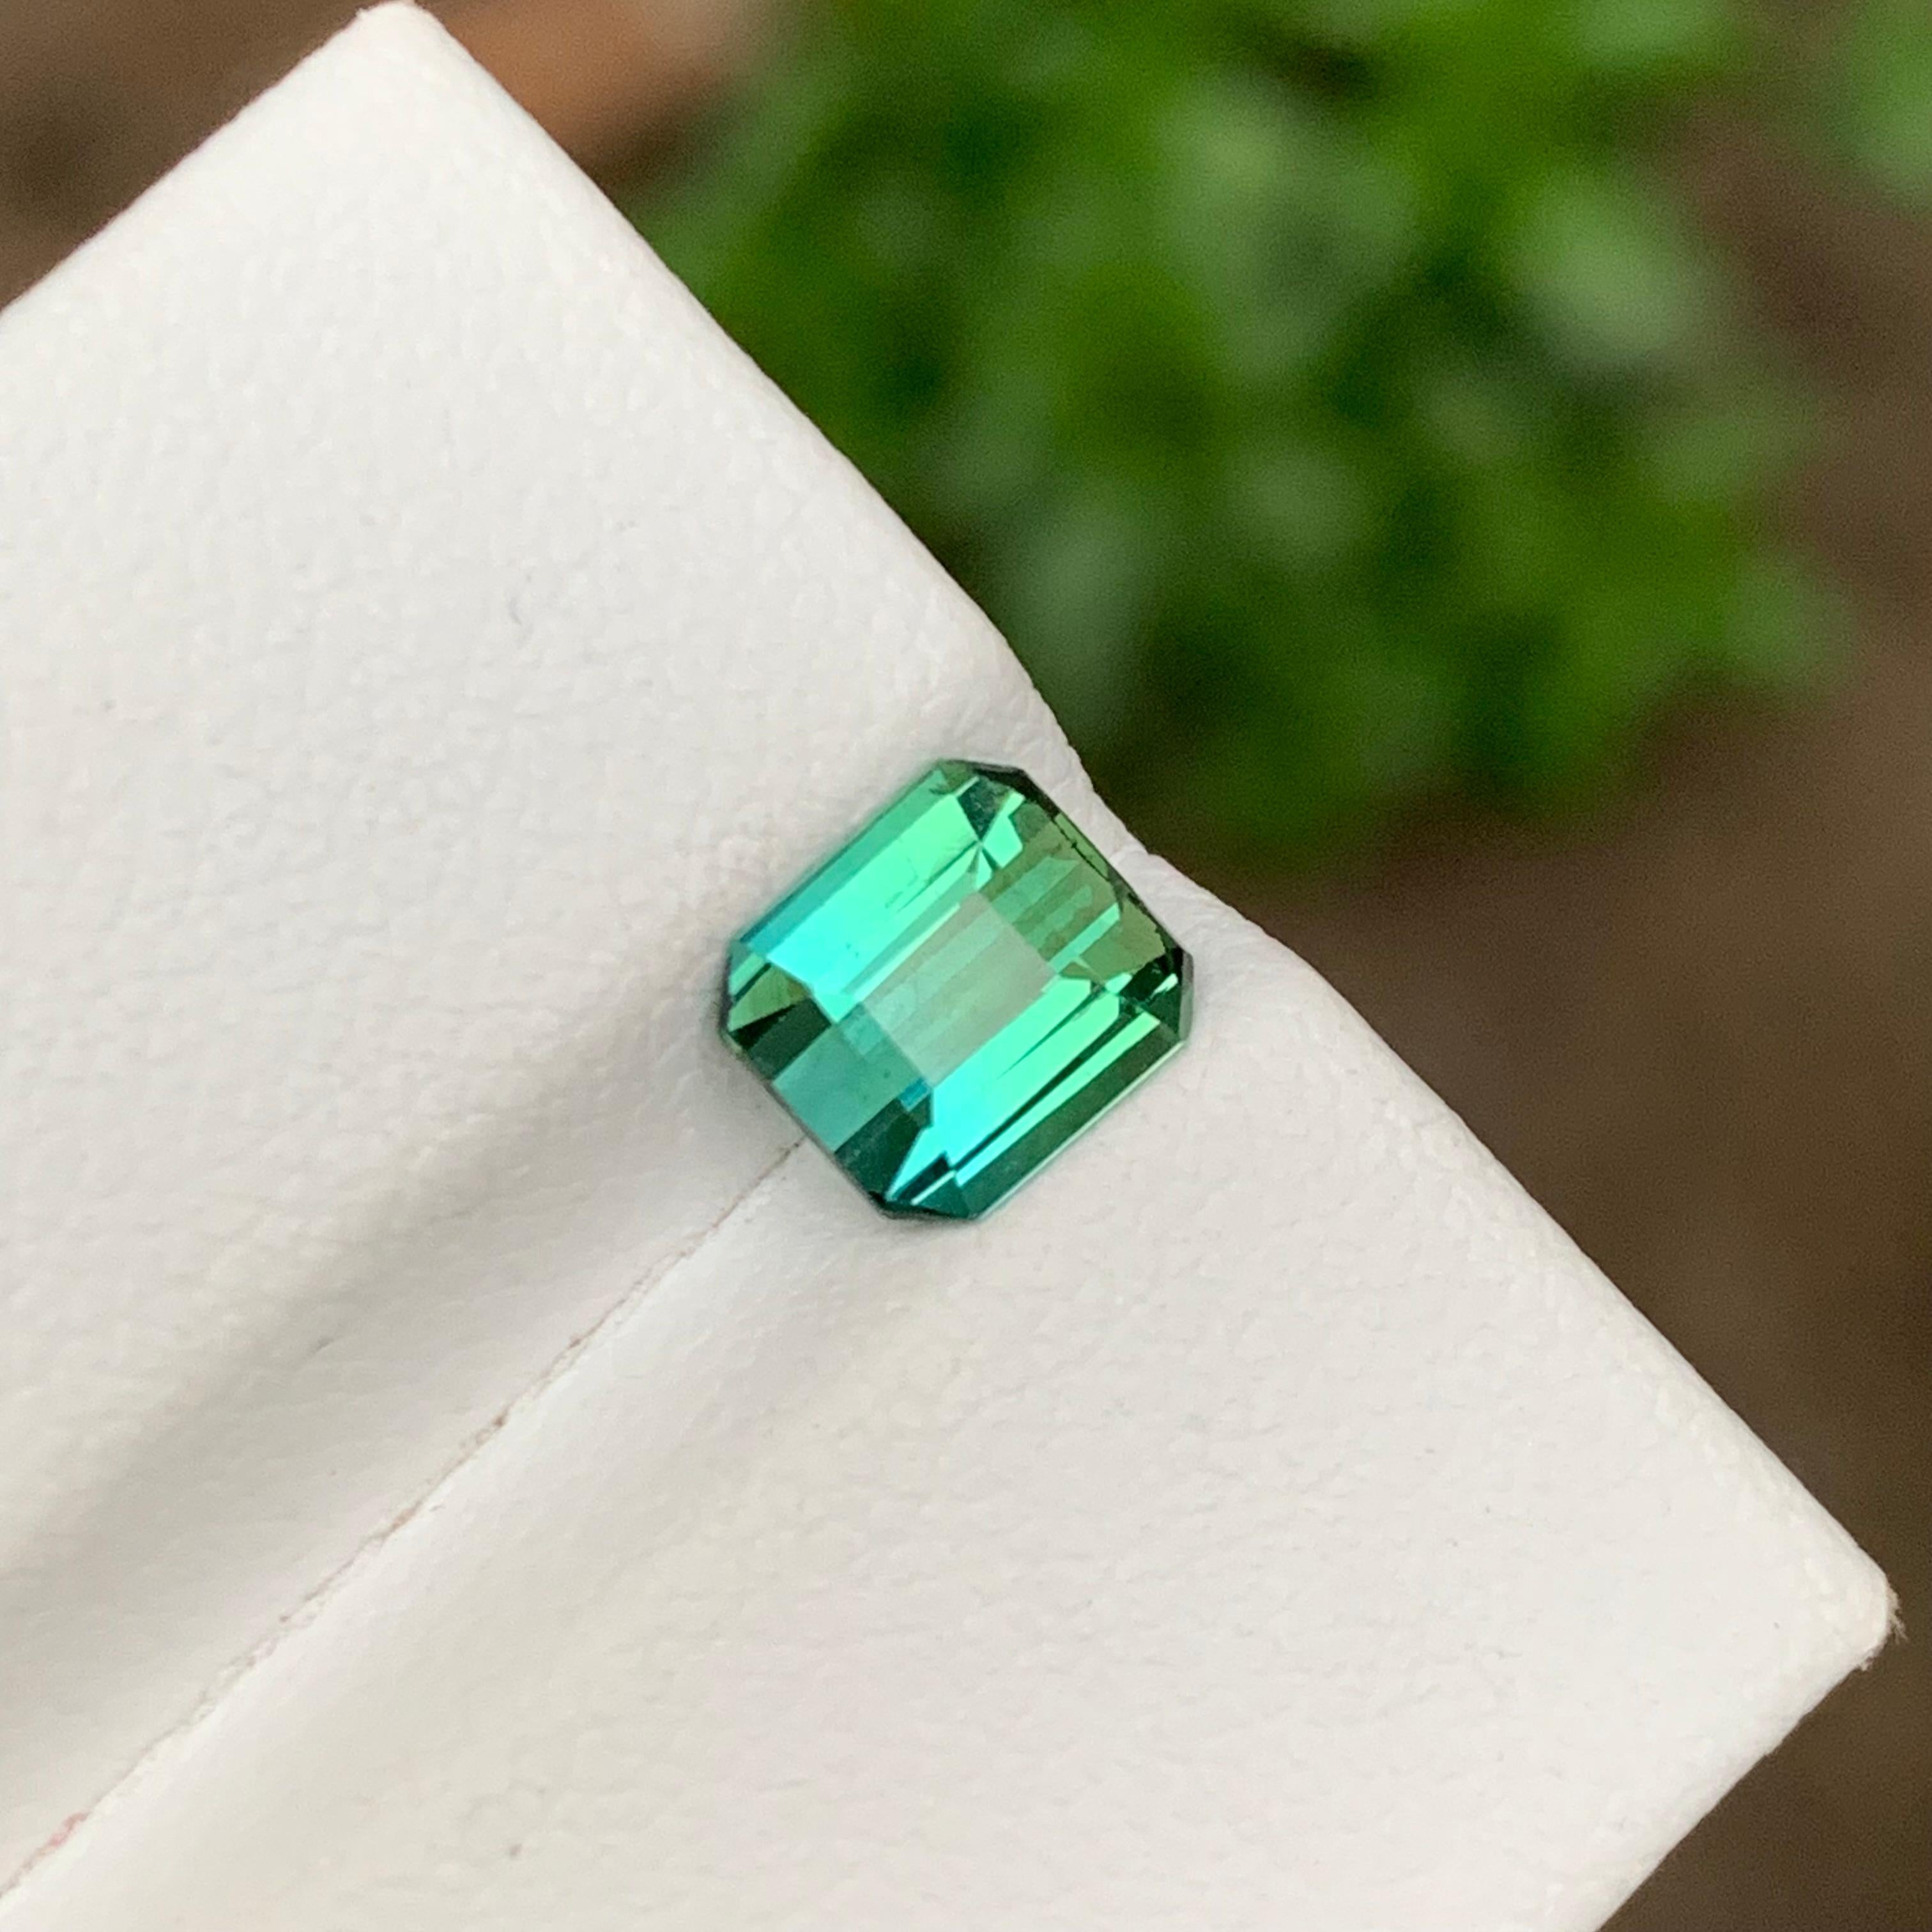 GEMSTONE TYPE: Tourmaline
PIECE(S): 1
WEIGHT: 1.35 Carats
SHAPE: Emerald
SIZE (MM): 6.65 x 6.06 x 3.85
COLOR: Light Blue and Green Two Tone
CLARITY: Approx Eye Clean
TREATMENT: None
ORIGIN: Afghanistan
CERTIFICATE: On demand

Introducing our